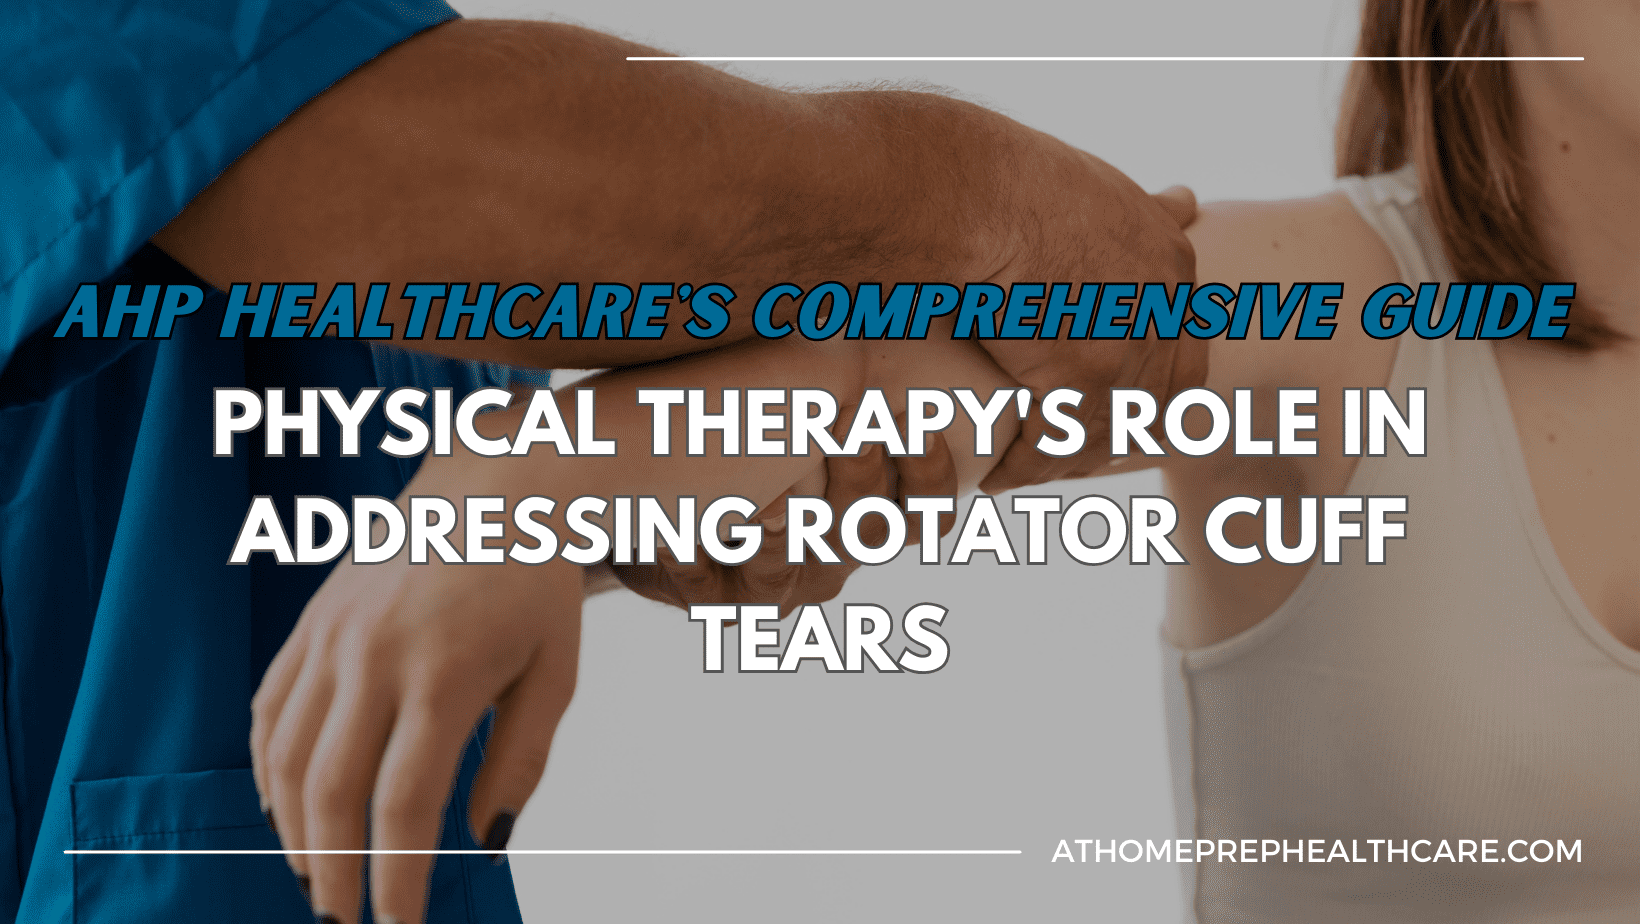 Physical Therapy's Role in Addressing Rotator Cuff Tears